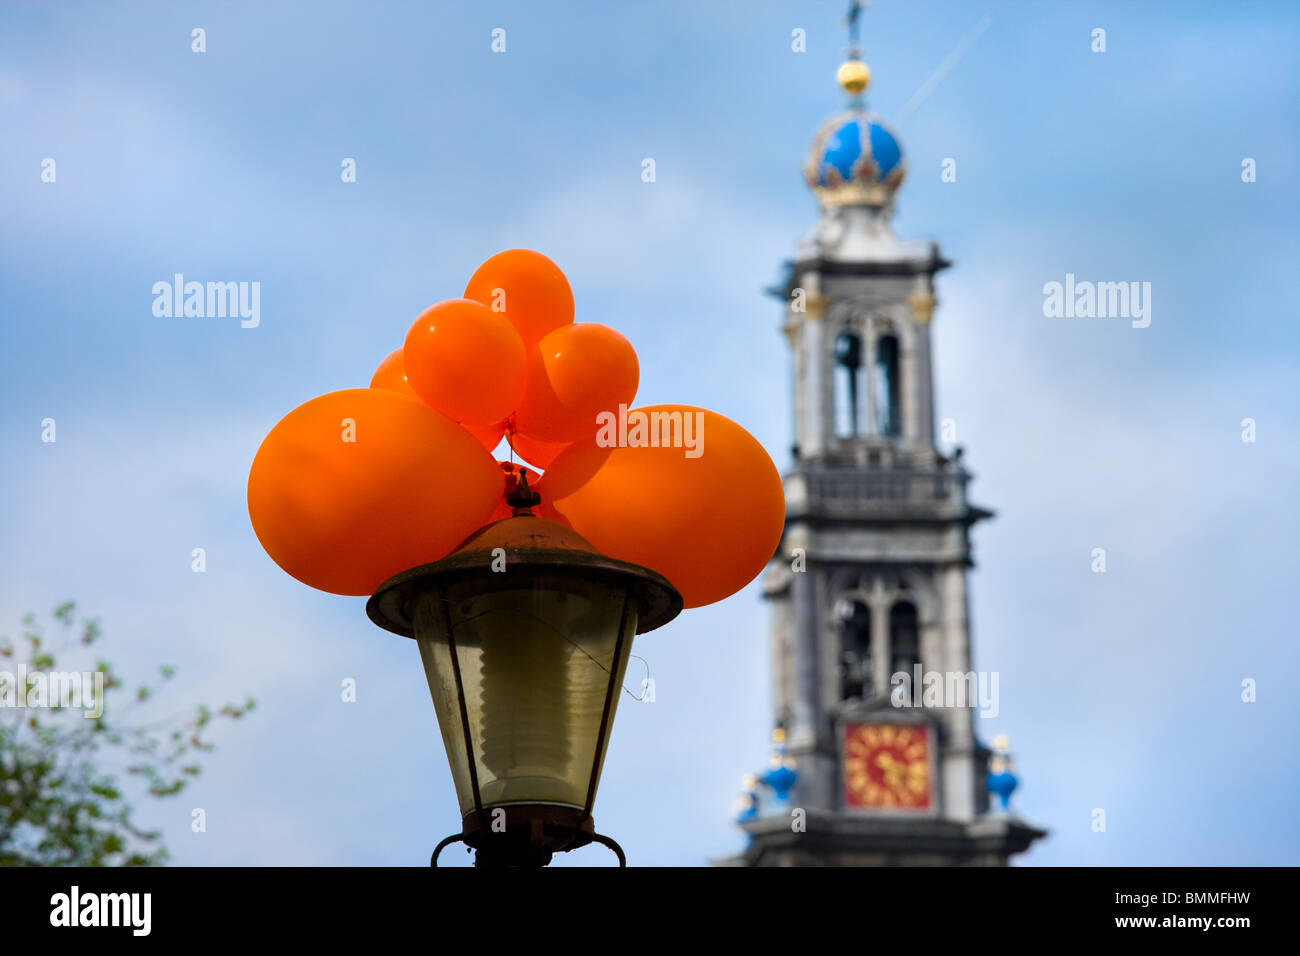 Amsterdam Westertoren, West Western Church Tower, icon for the city, with street light and festive orange balloons. On Kings day Stock Photo